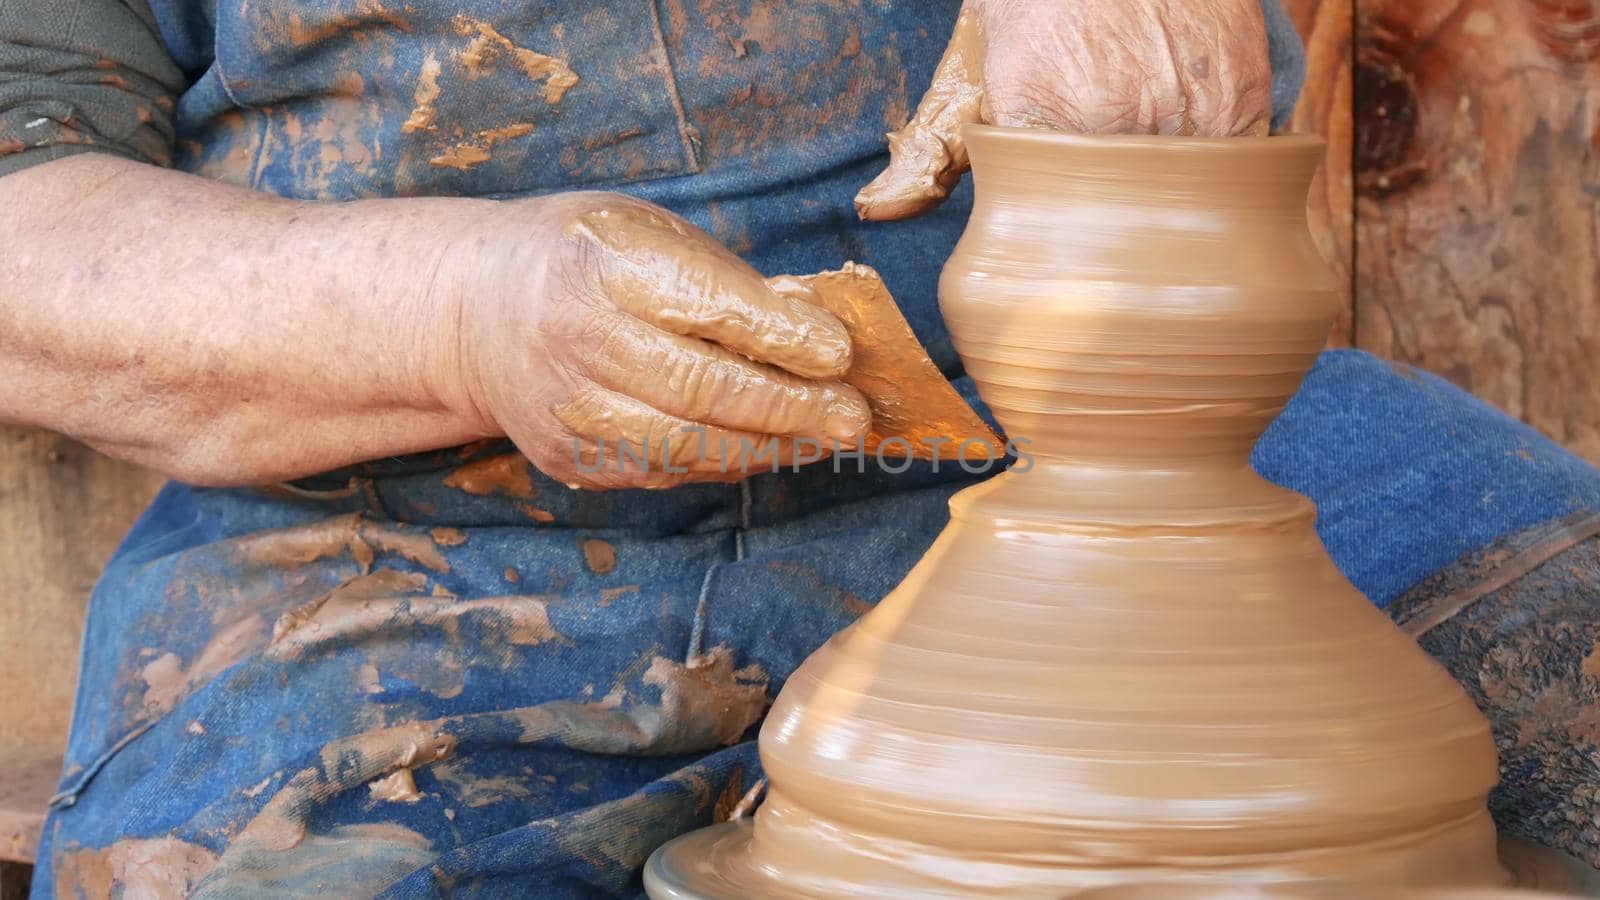 SAN DIEGO, CALIFORNIA USA - 5 JAN 2020: Potter working in mexican Oldtown, raw clay on pottery wheel. Man's hands, ceramist in process of modeling handcrafted clayware. Craftsman creating ceramic by DogoraSun